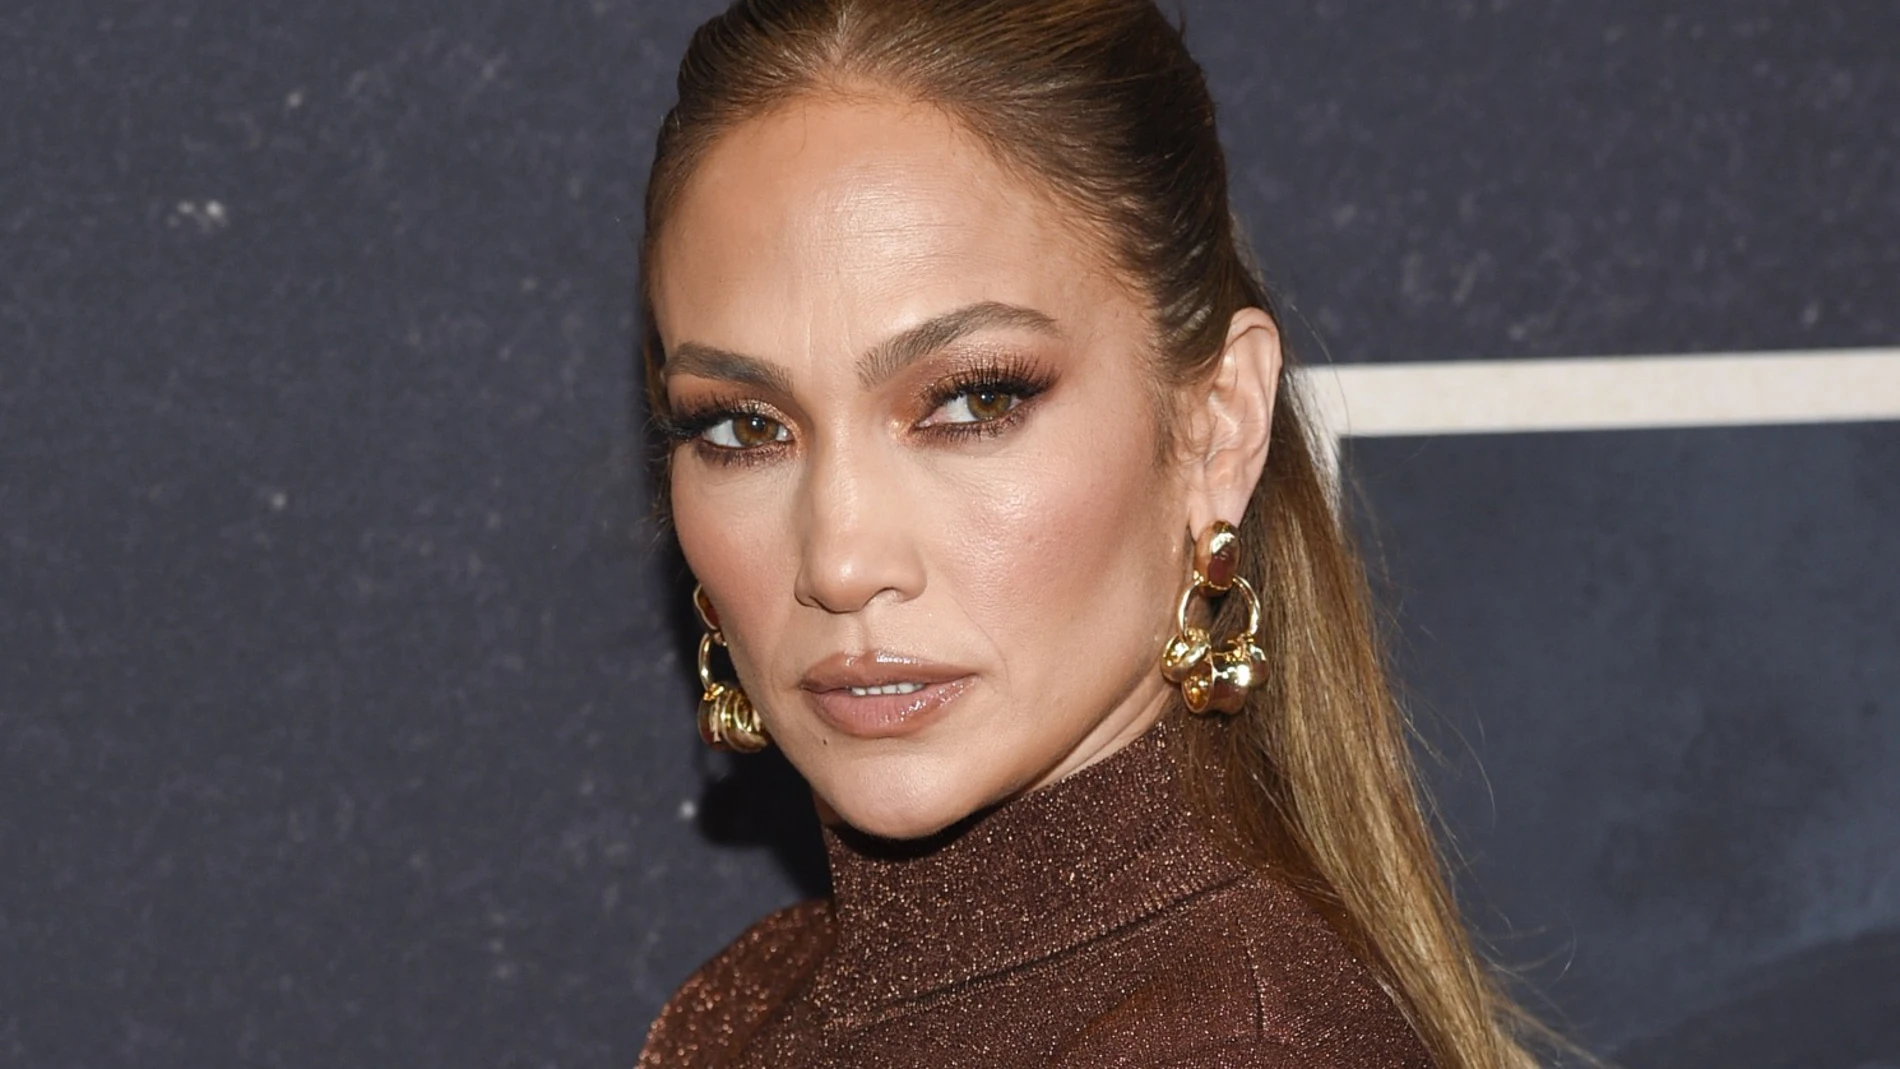 Actress and singer Jennifer Lopez at the premiere of "The Last Duel" on Saturday, Oct. 9, 2021, in New York.